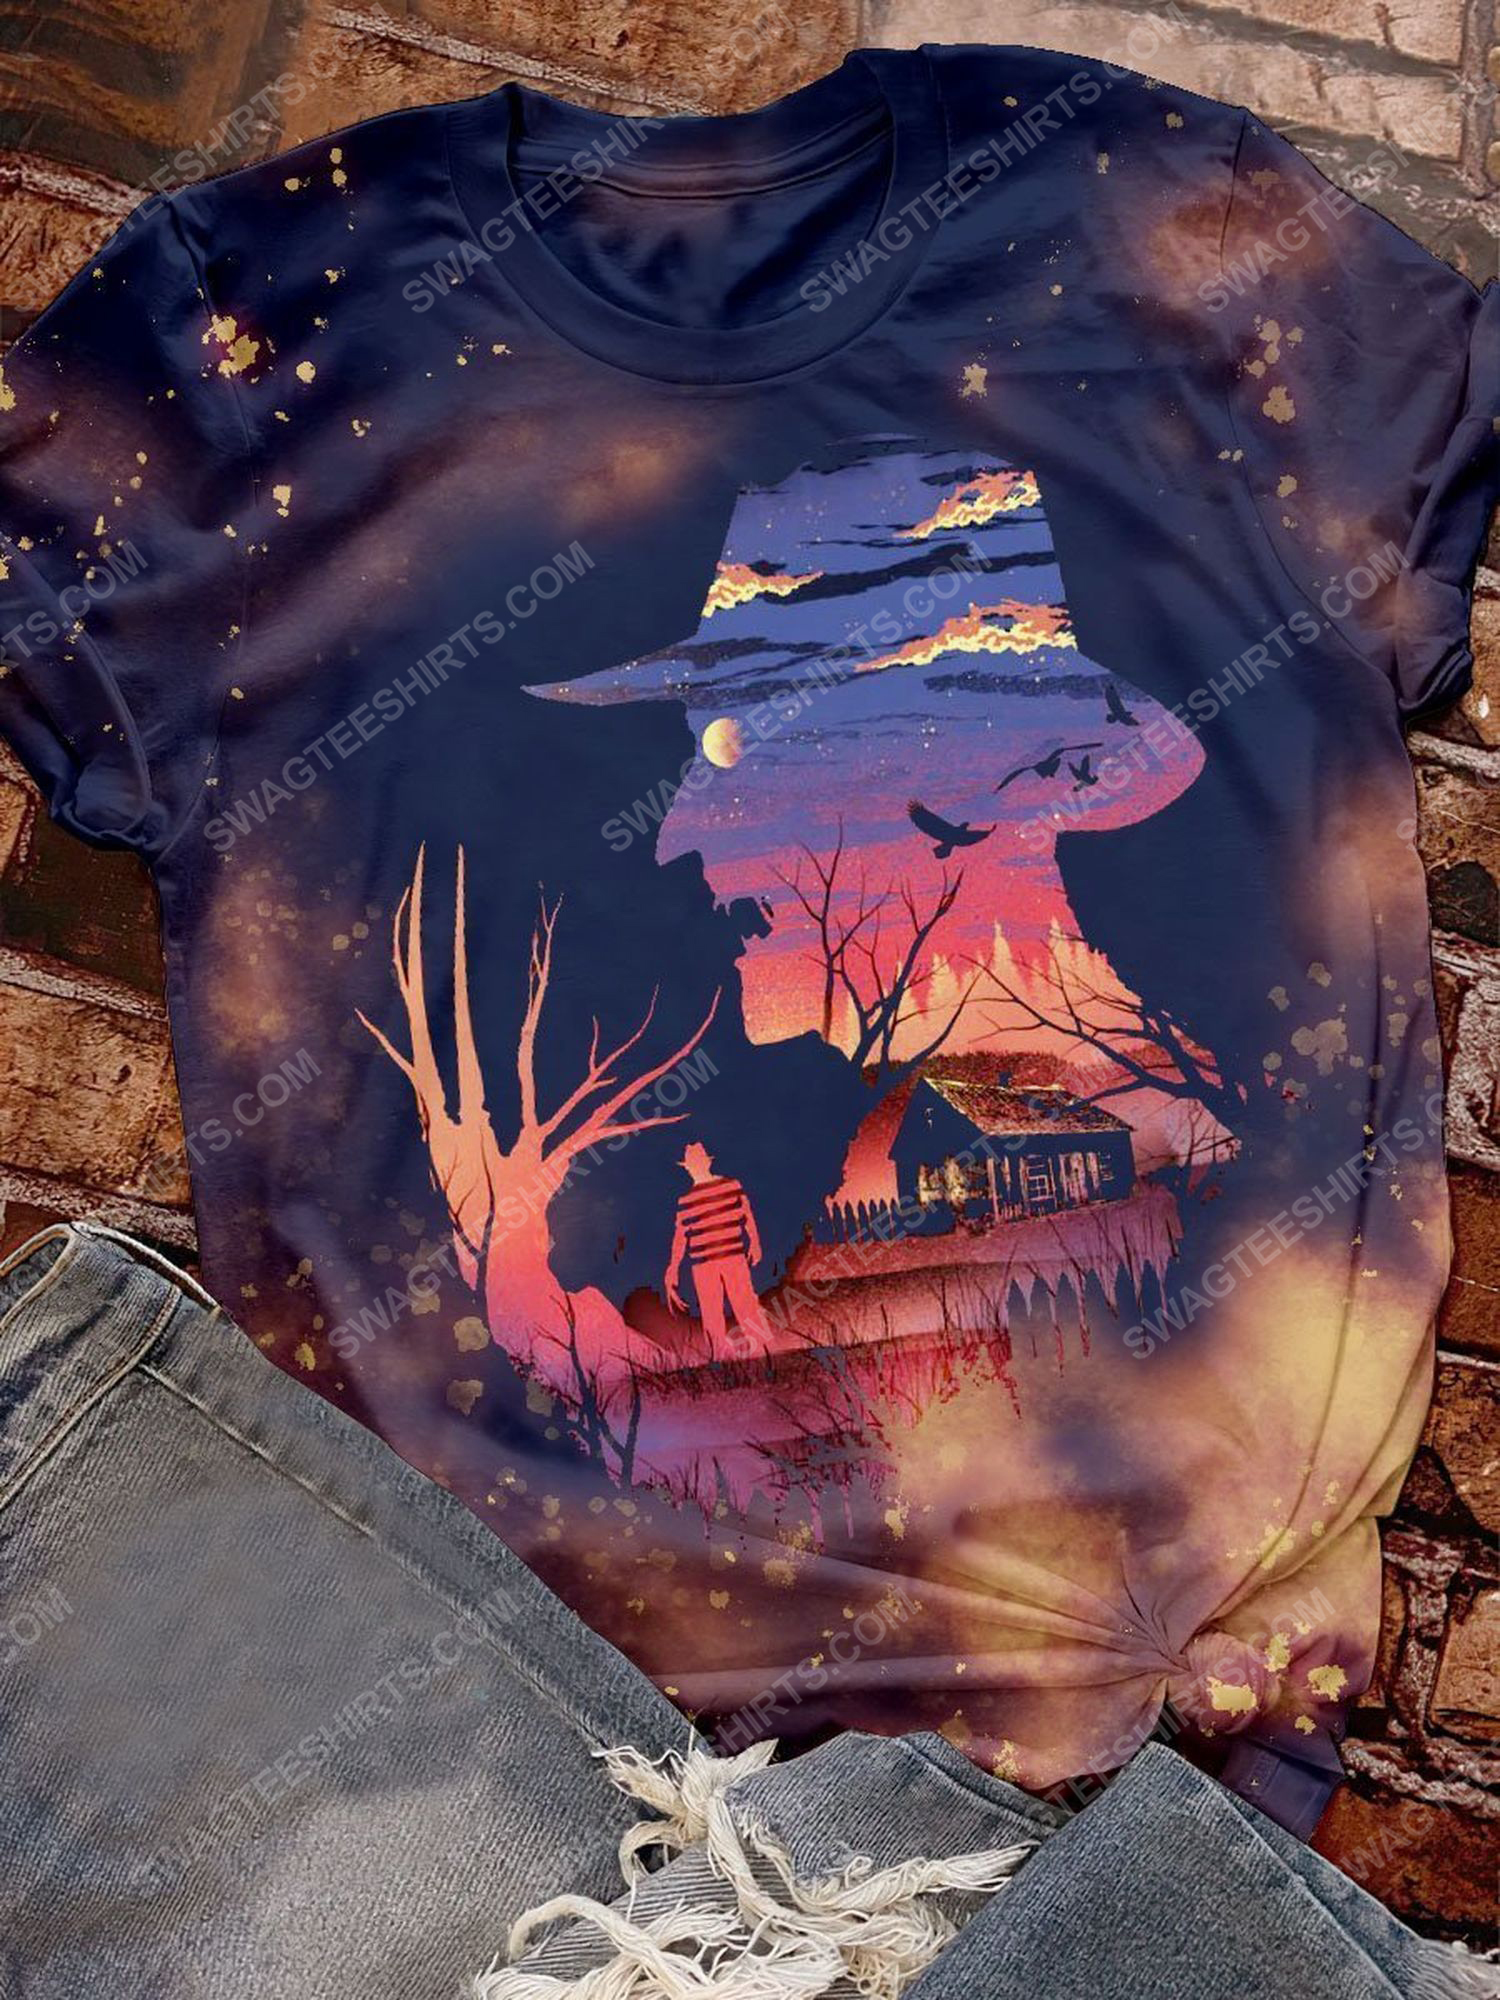 [special edition] Halloween night and freddy’s nightmares full print shirt – maria (halloween)